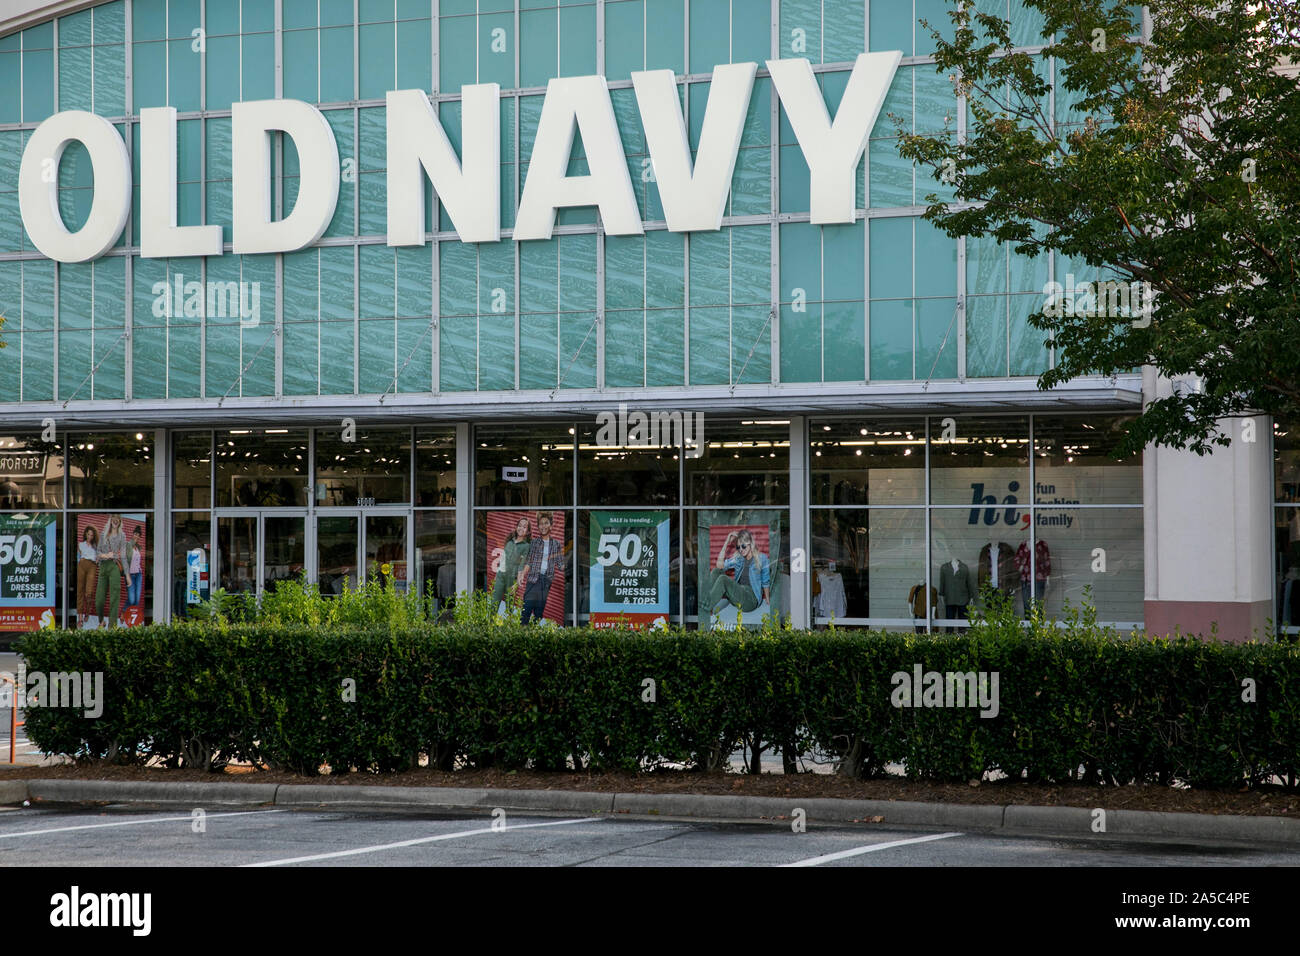 A logo sign outside of a Old Navy retail store location in Greensboro, North Carolina on September 15, 2019. Stock Photo